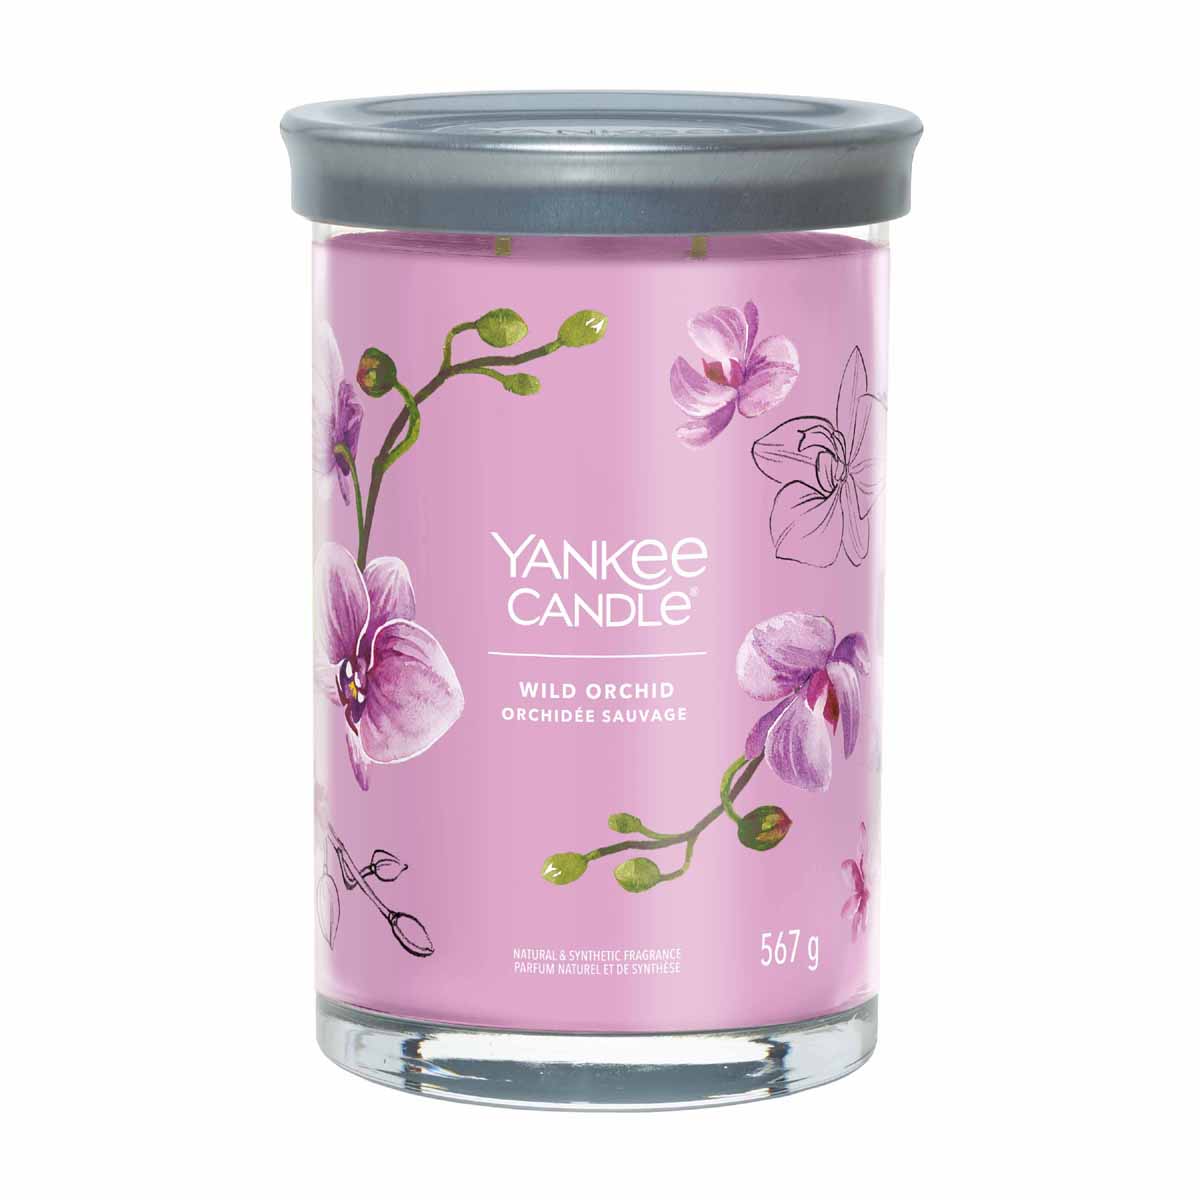 Yankee Candle Signature Wild Orchid Tumbler